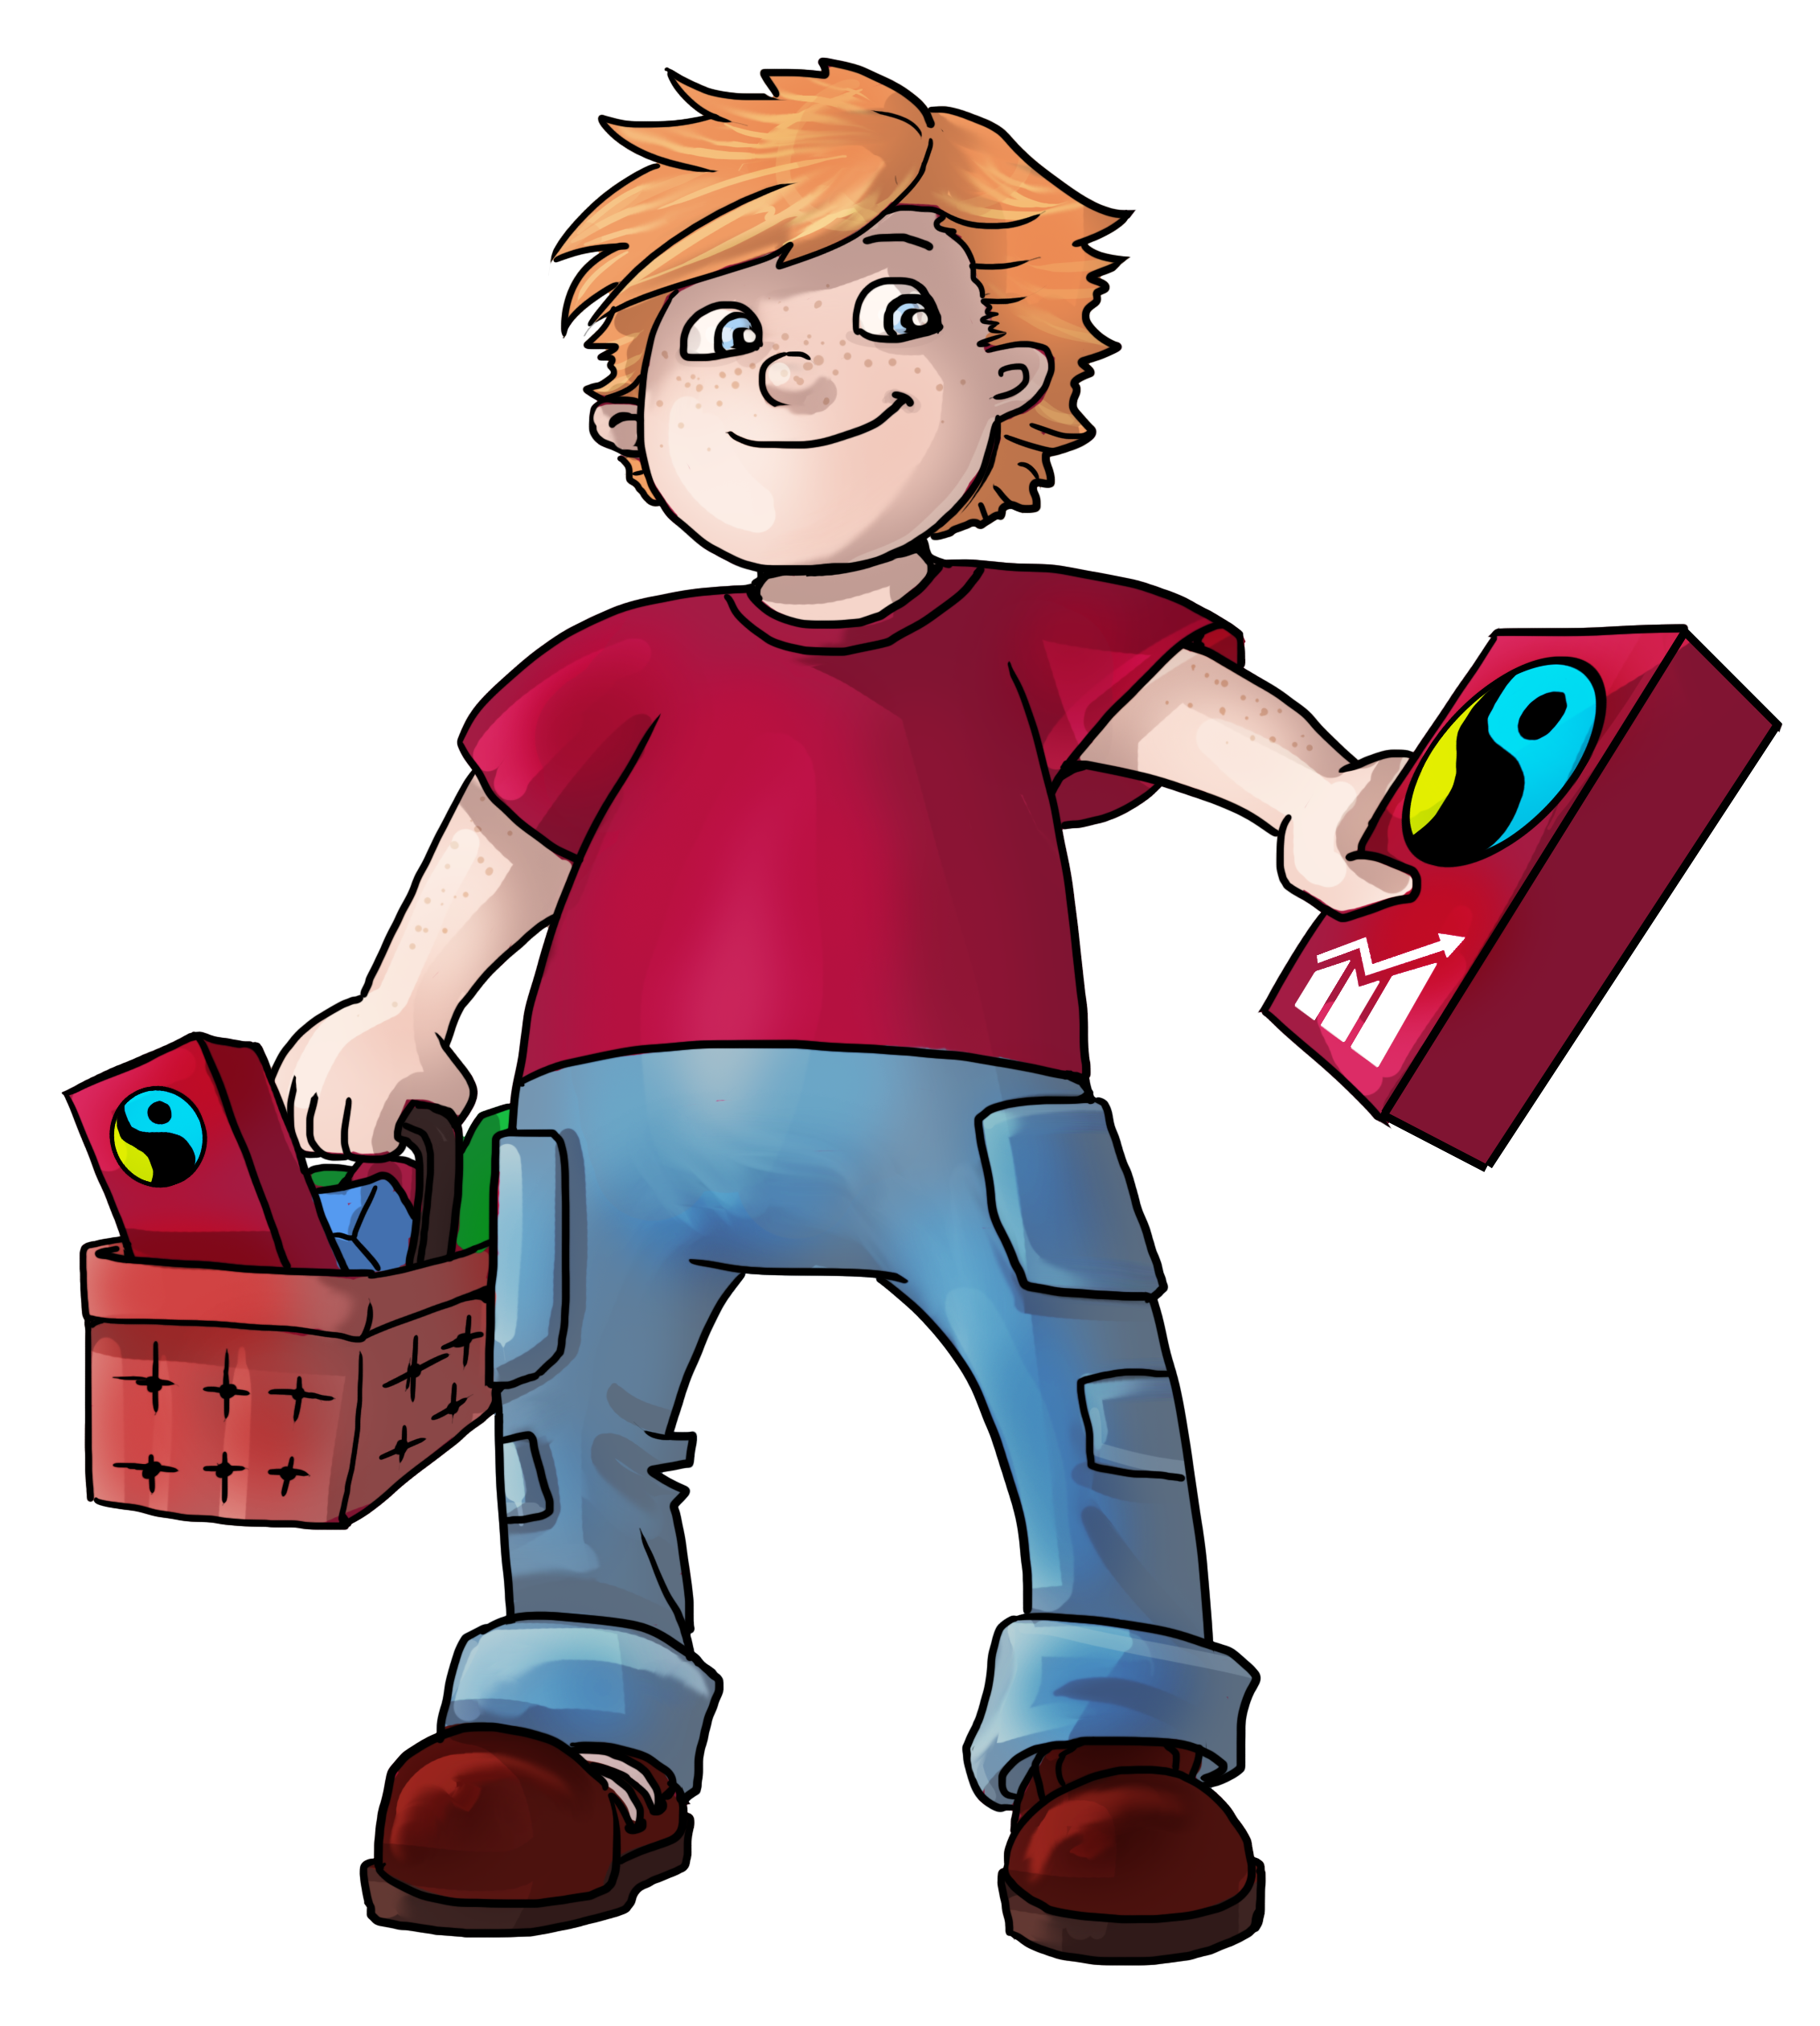 Illustration. A child is holding a basket of Fairtrade-labeled boxes.